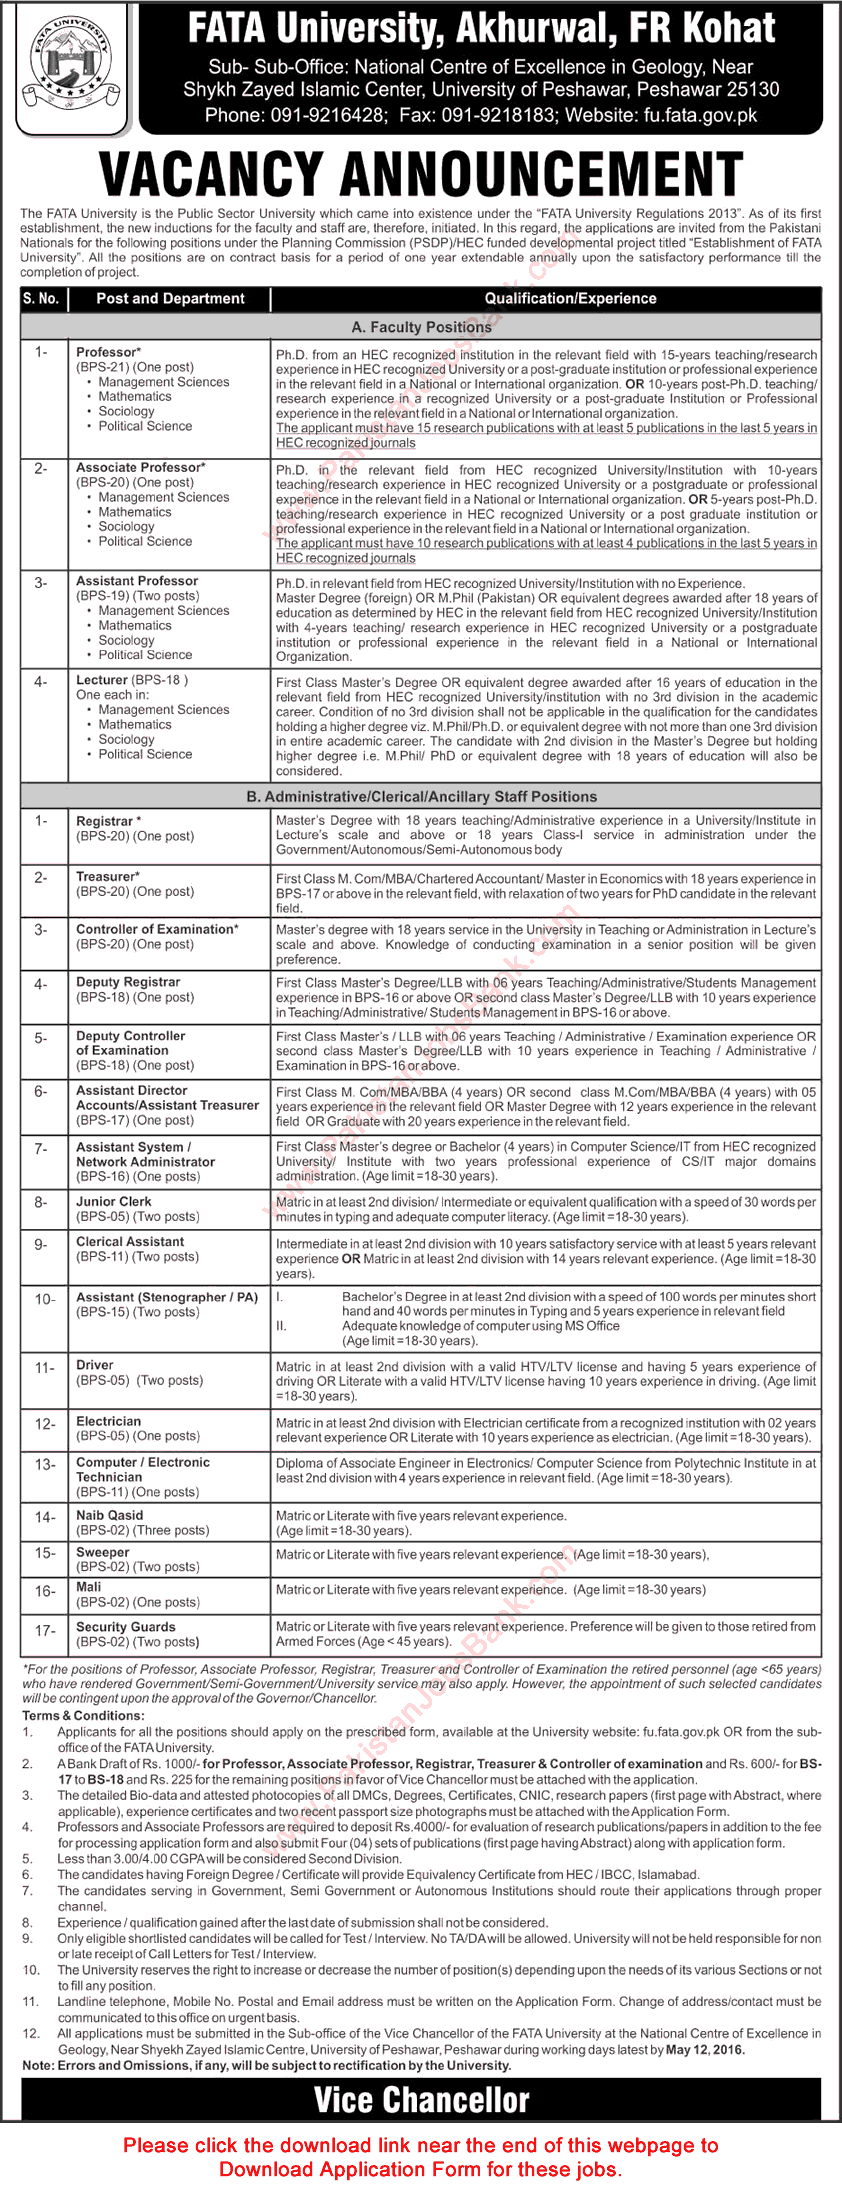 FATA University Jobs 2016 April Application Form Teaching Faculty, Admin & Support Staff Latest